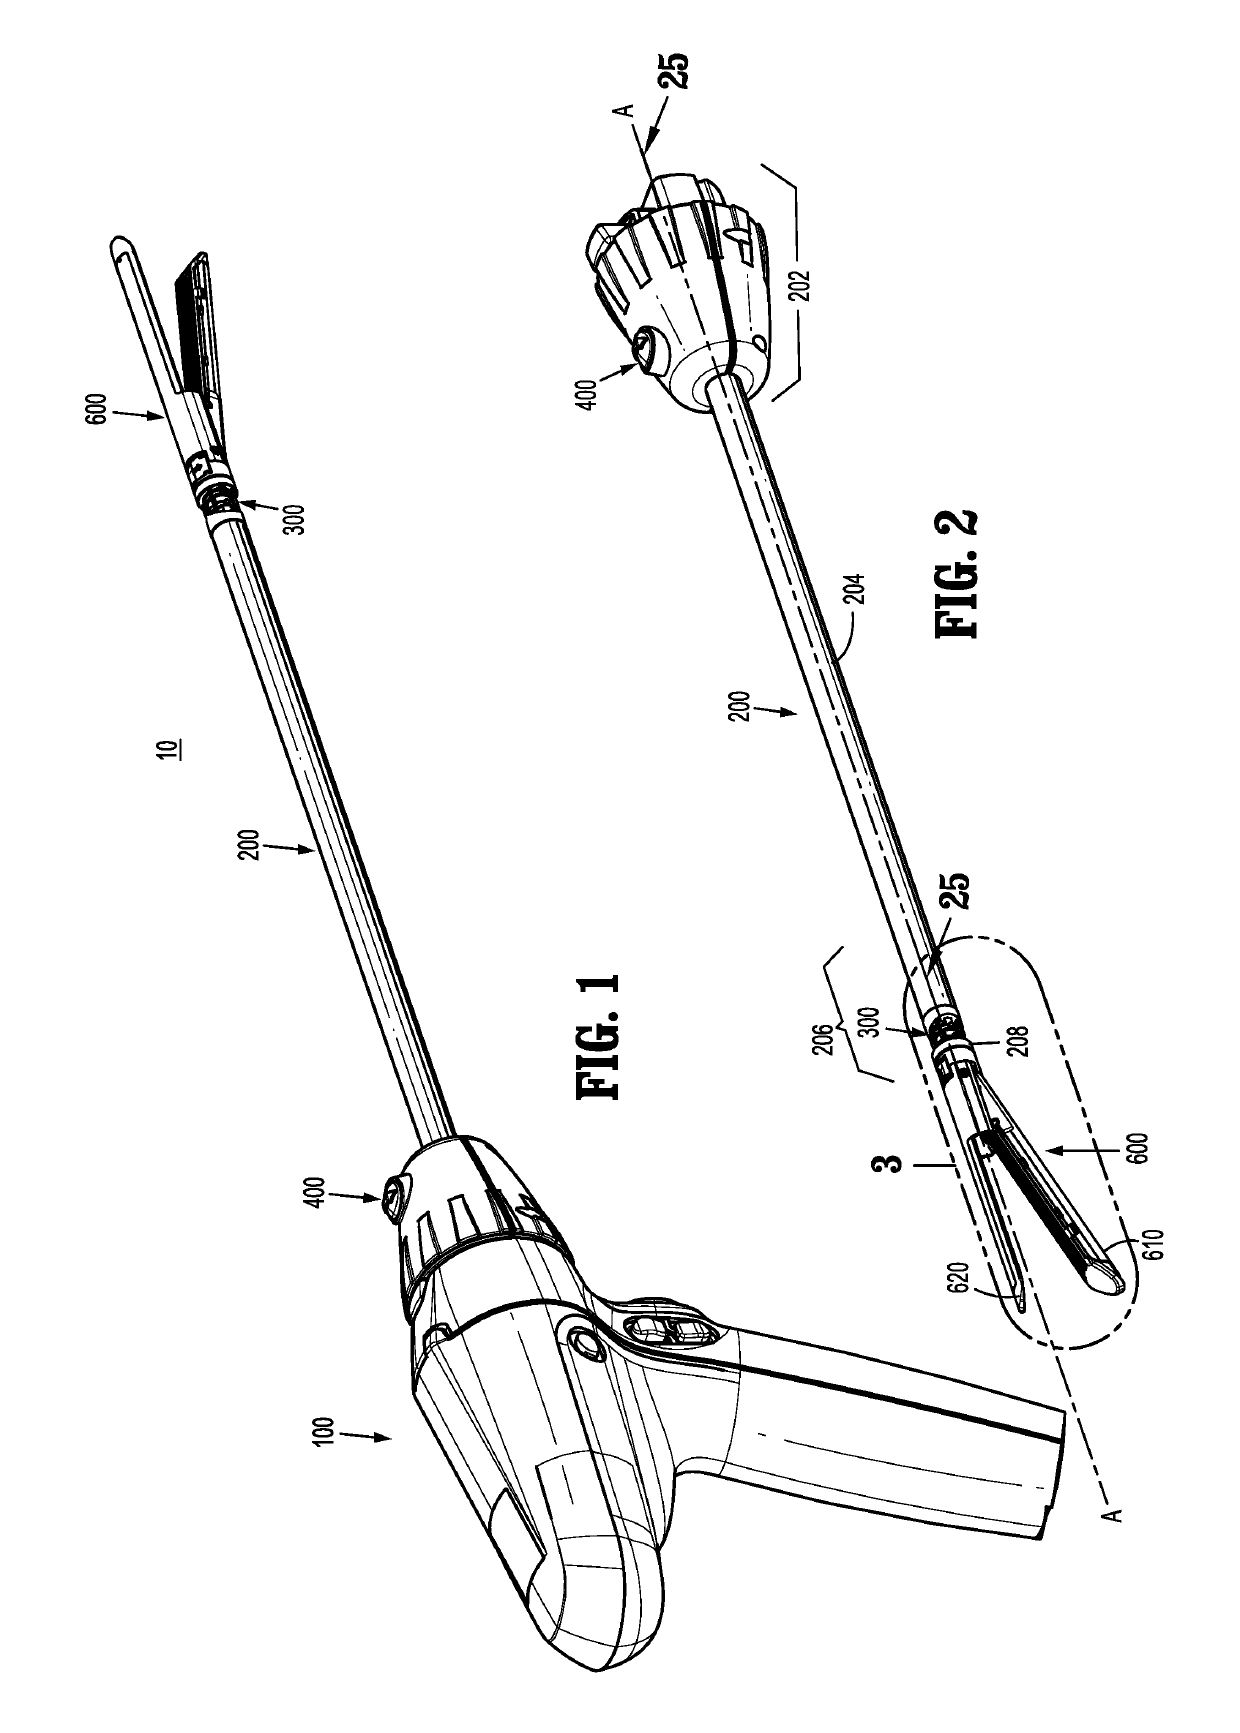 Adapter with centering mechanism for articulation joint